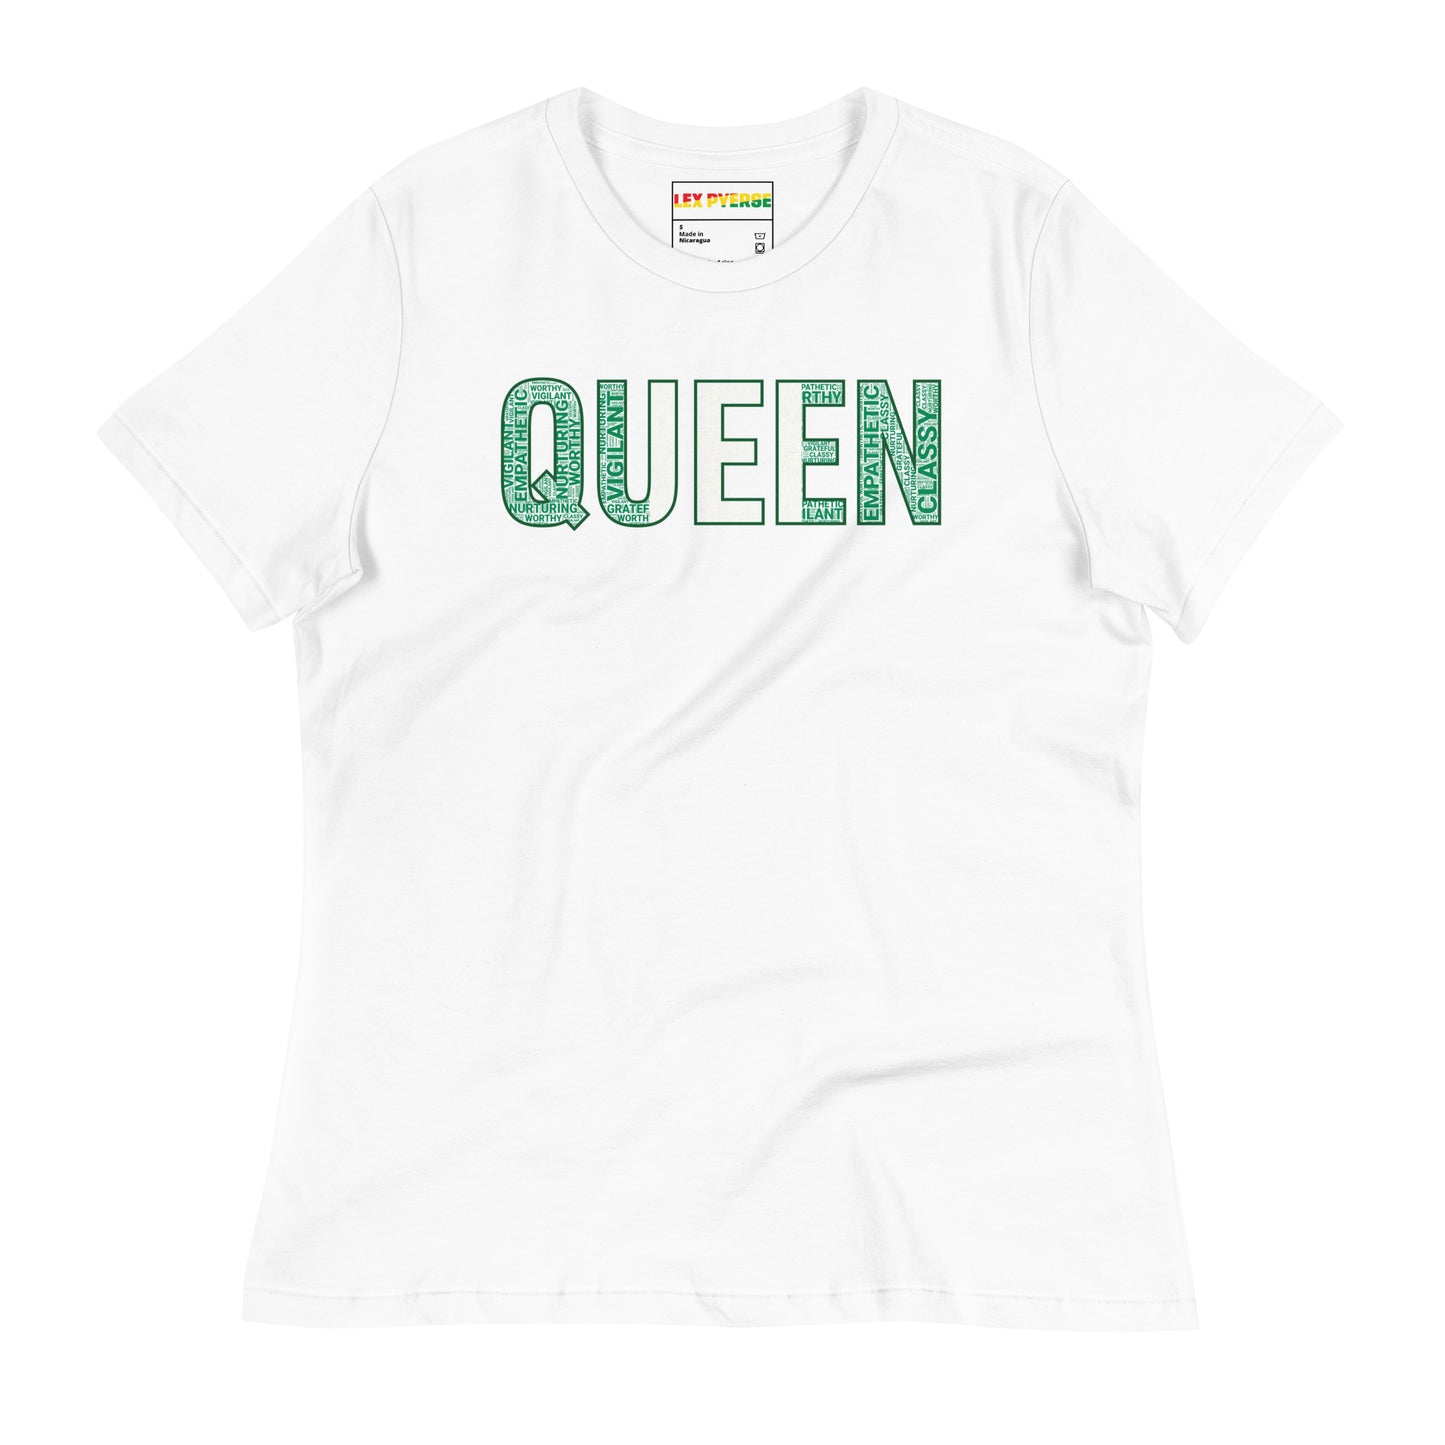 QUEEN Nigerian Inspired Word Cluster Women's Relaxed T-Shirt